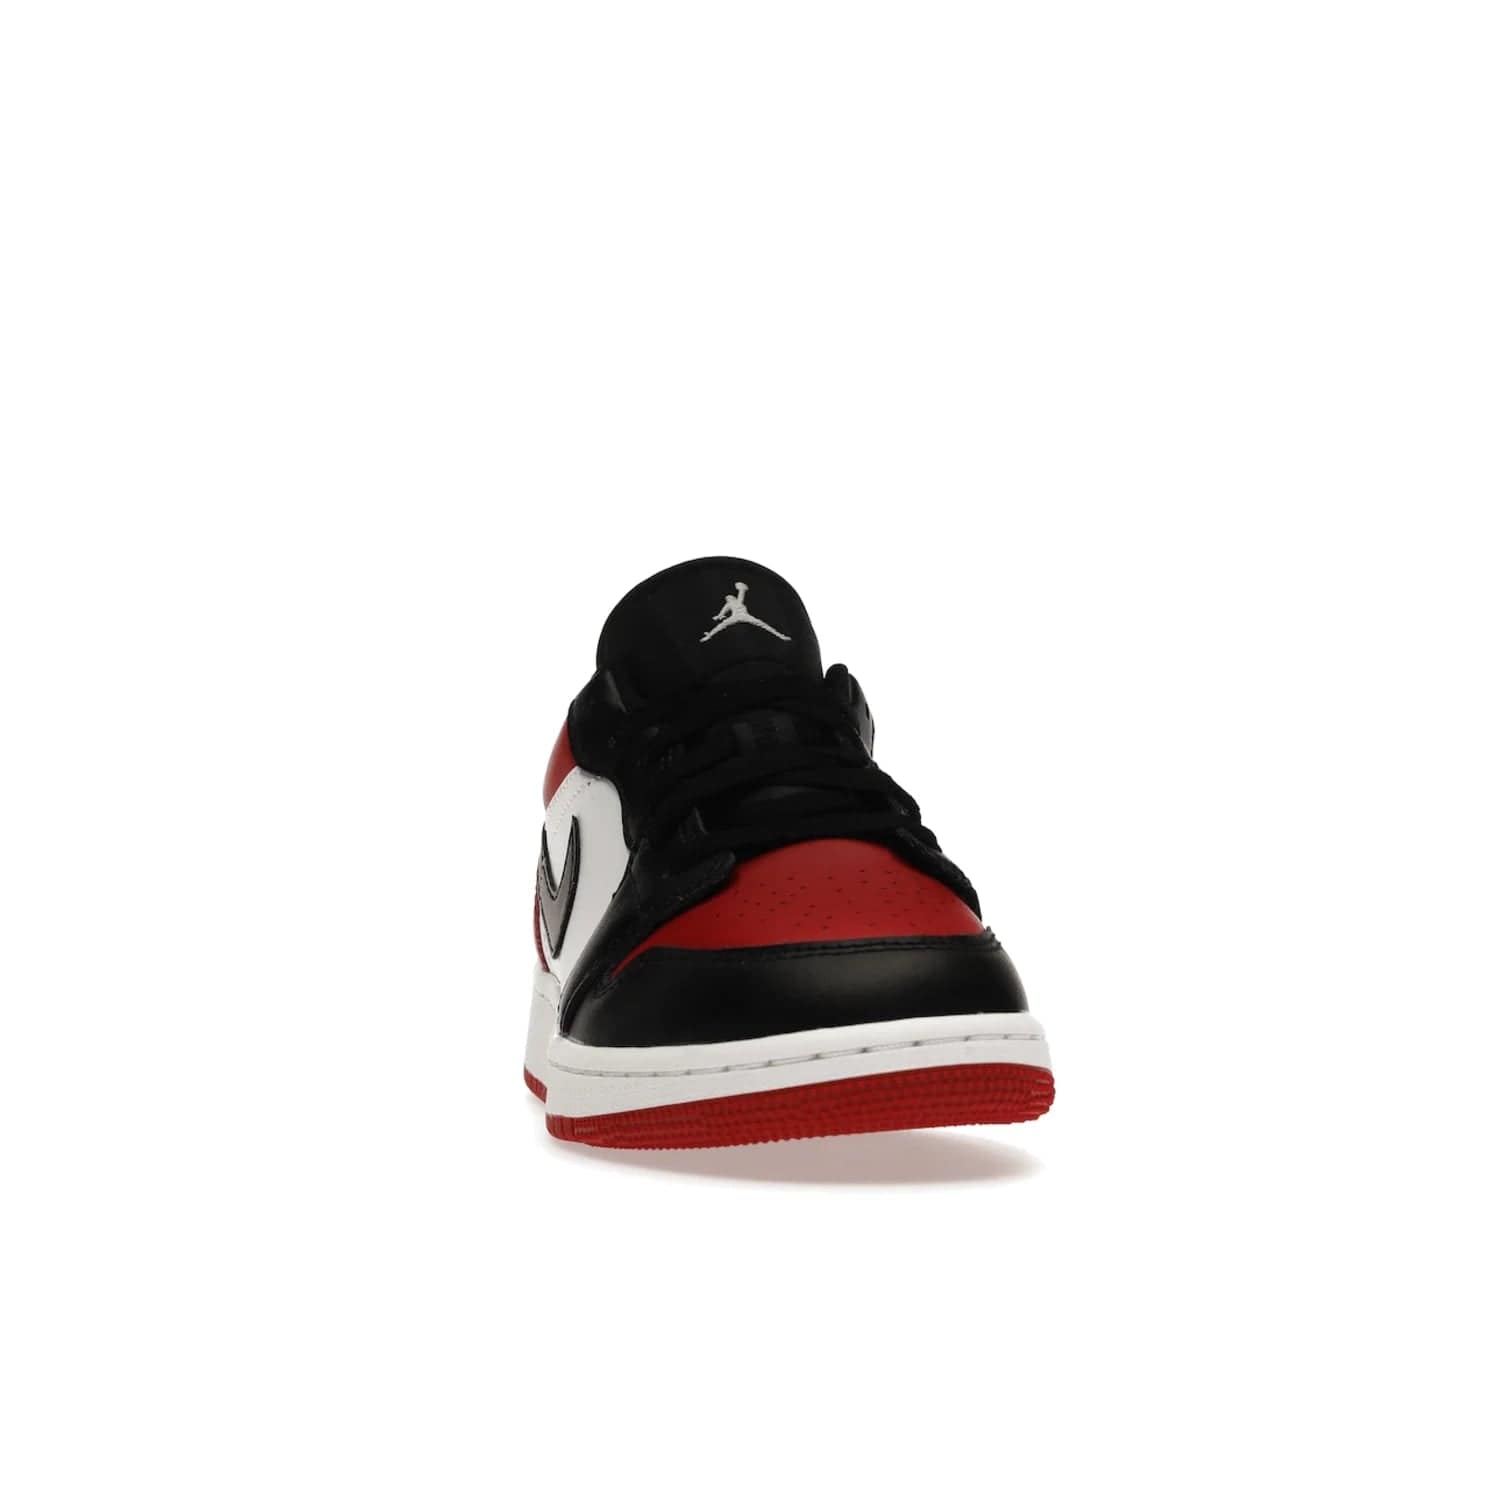 Jordan 1 Low Bred Toe (GS) - Image 9 - Only at www.BallersClubKickz.com - #
Iconic sneaker from Jordan brand with classic colorway, unique detailing & Air Jordan Wings logo. Step into the shoes of the greats with the Jordan 1 Low Bred Toe GS!